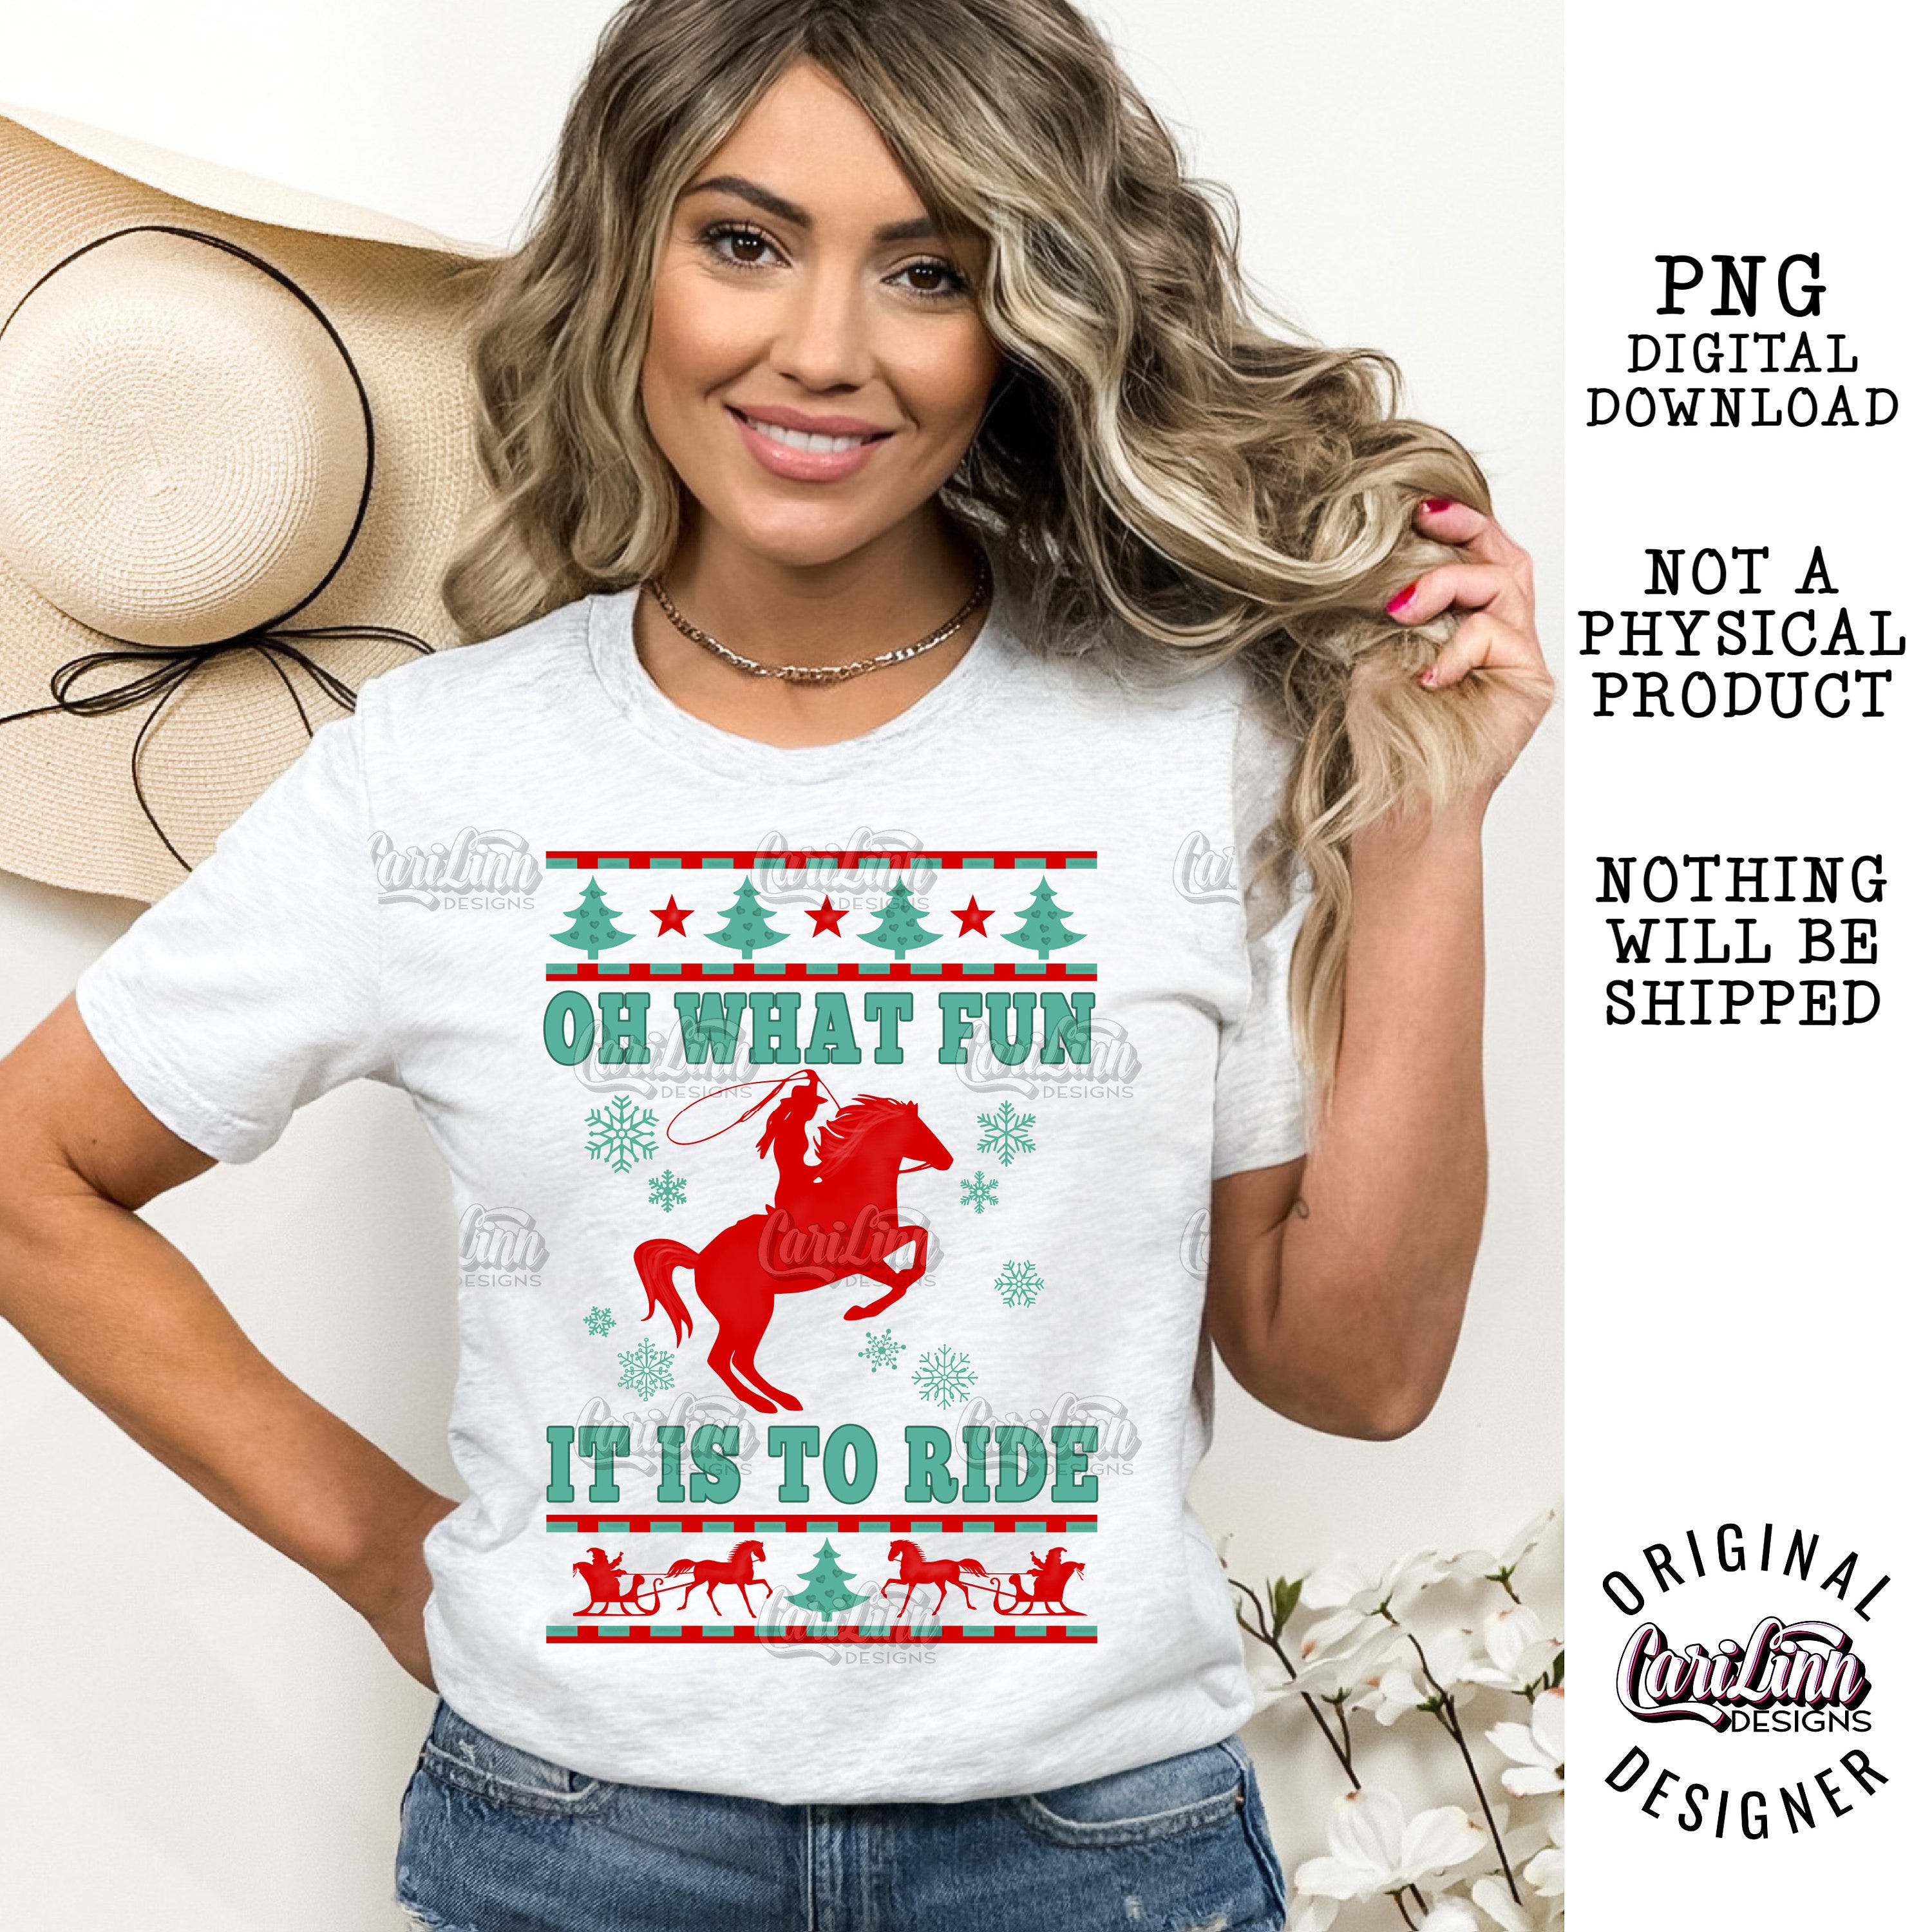 Oh What Fun it is to Ride, PNG Digital Download for Sublimation, DTF, DTG